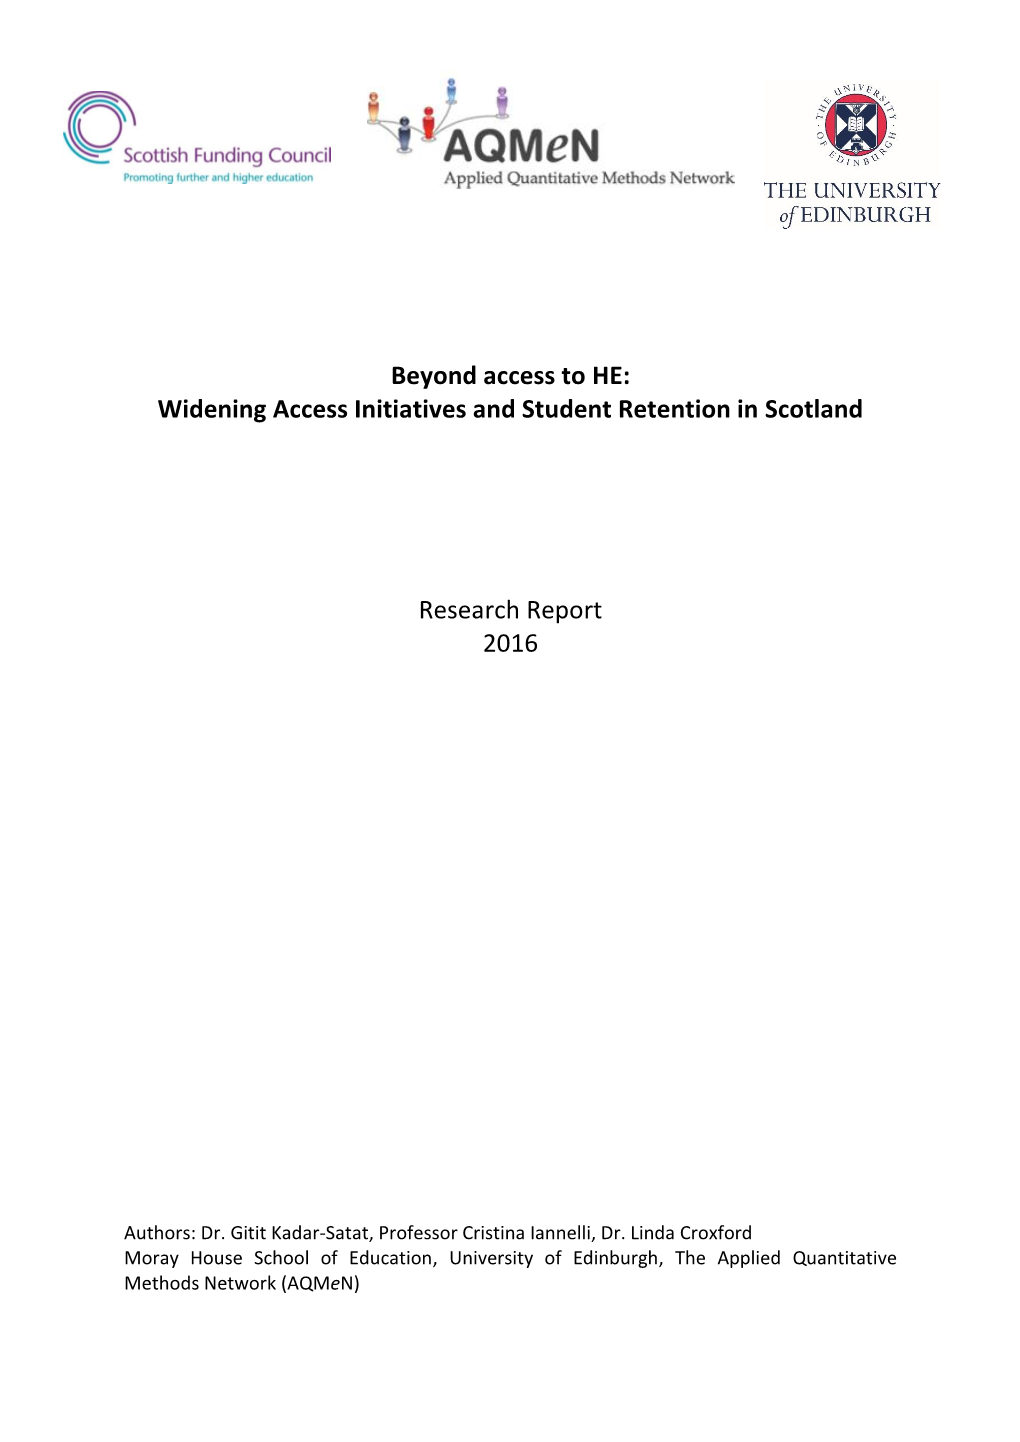 Beyond Access to HE: Widening Access Initiatives and Student Retention in Scotland